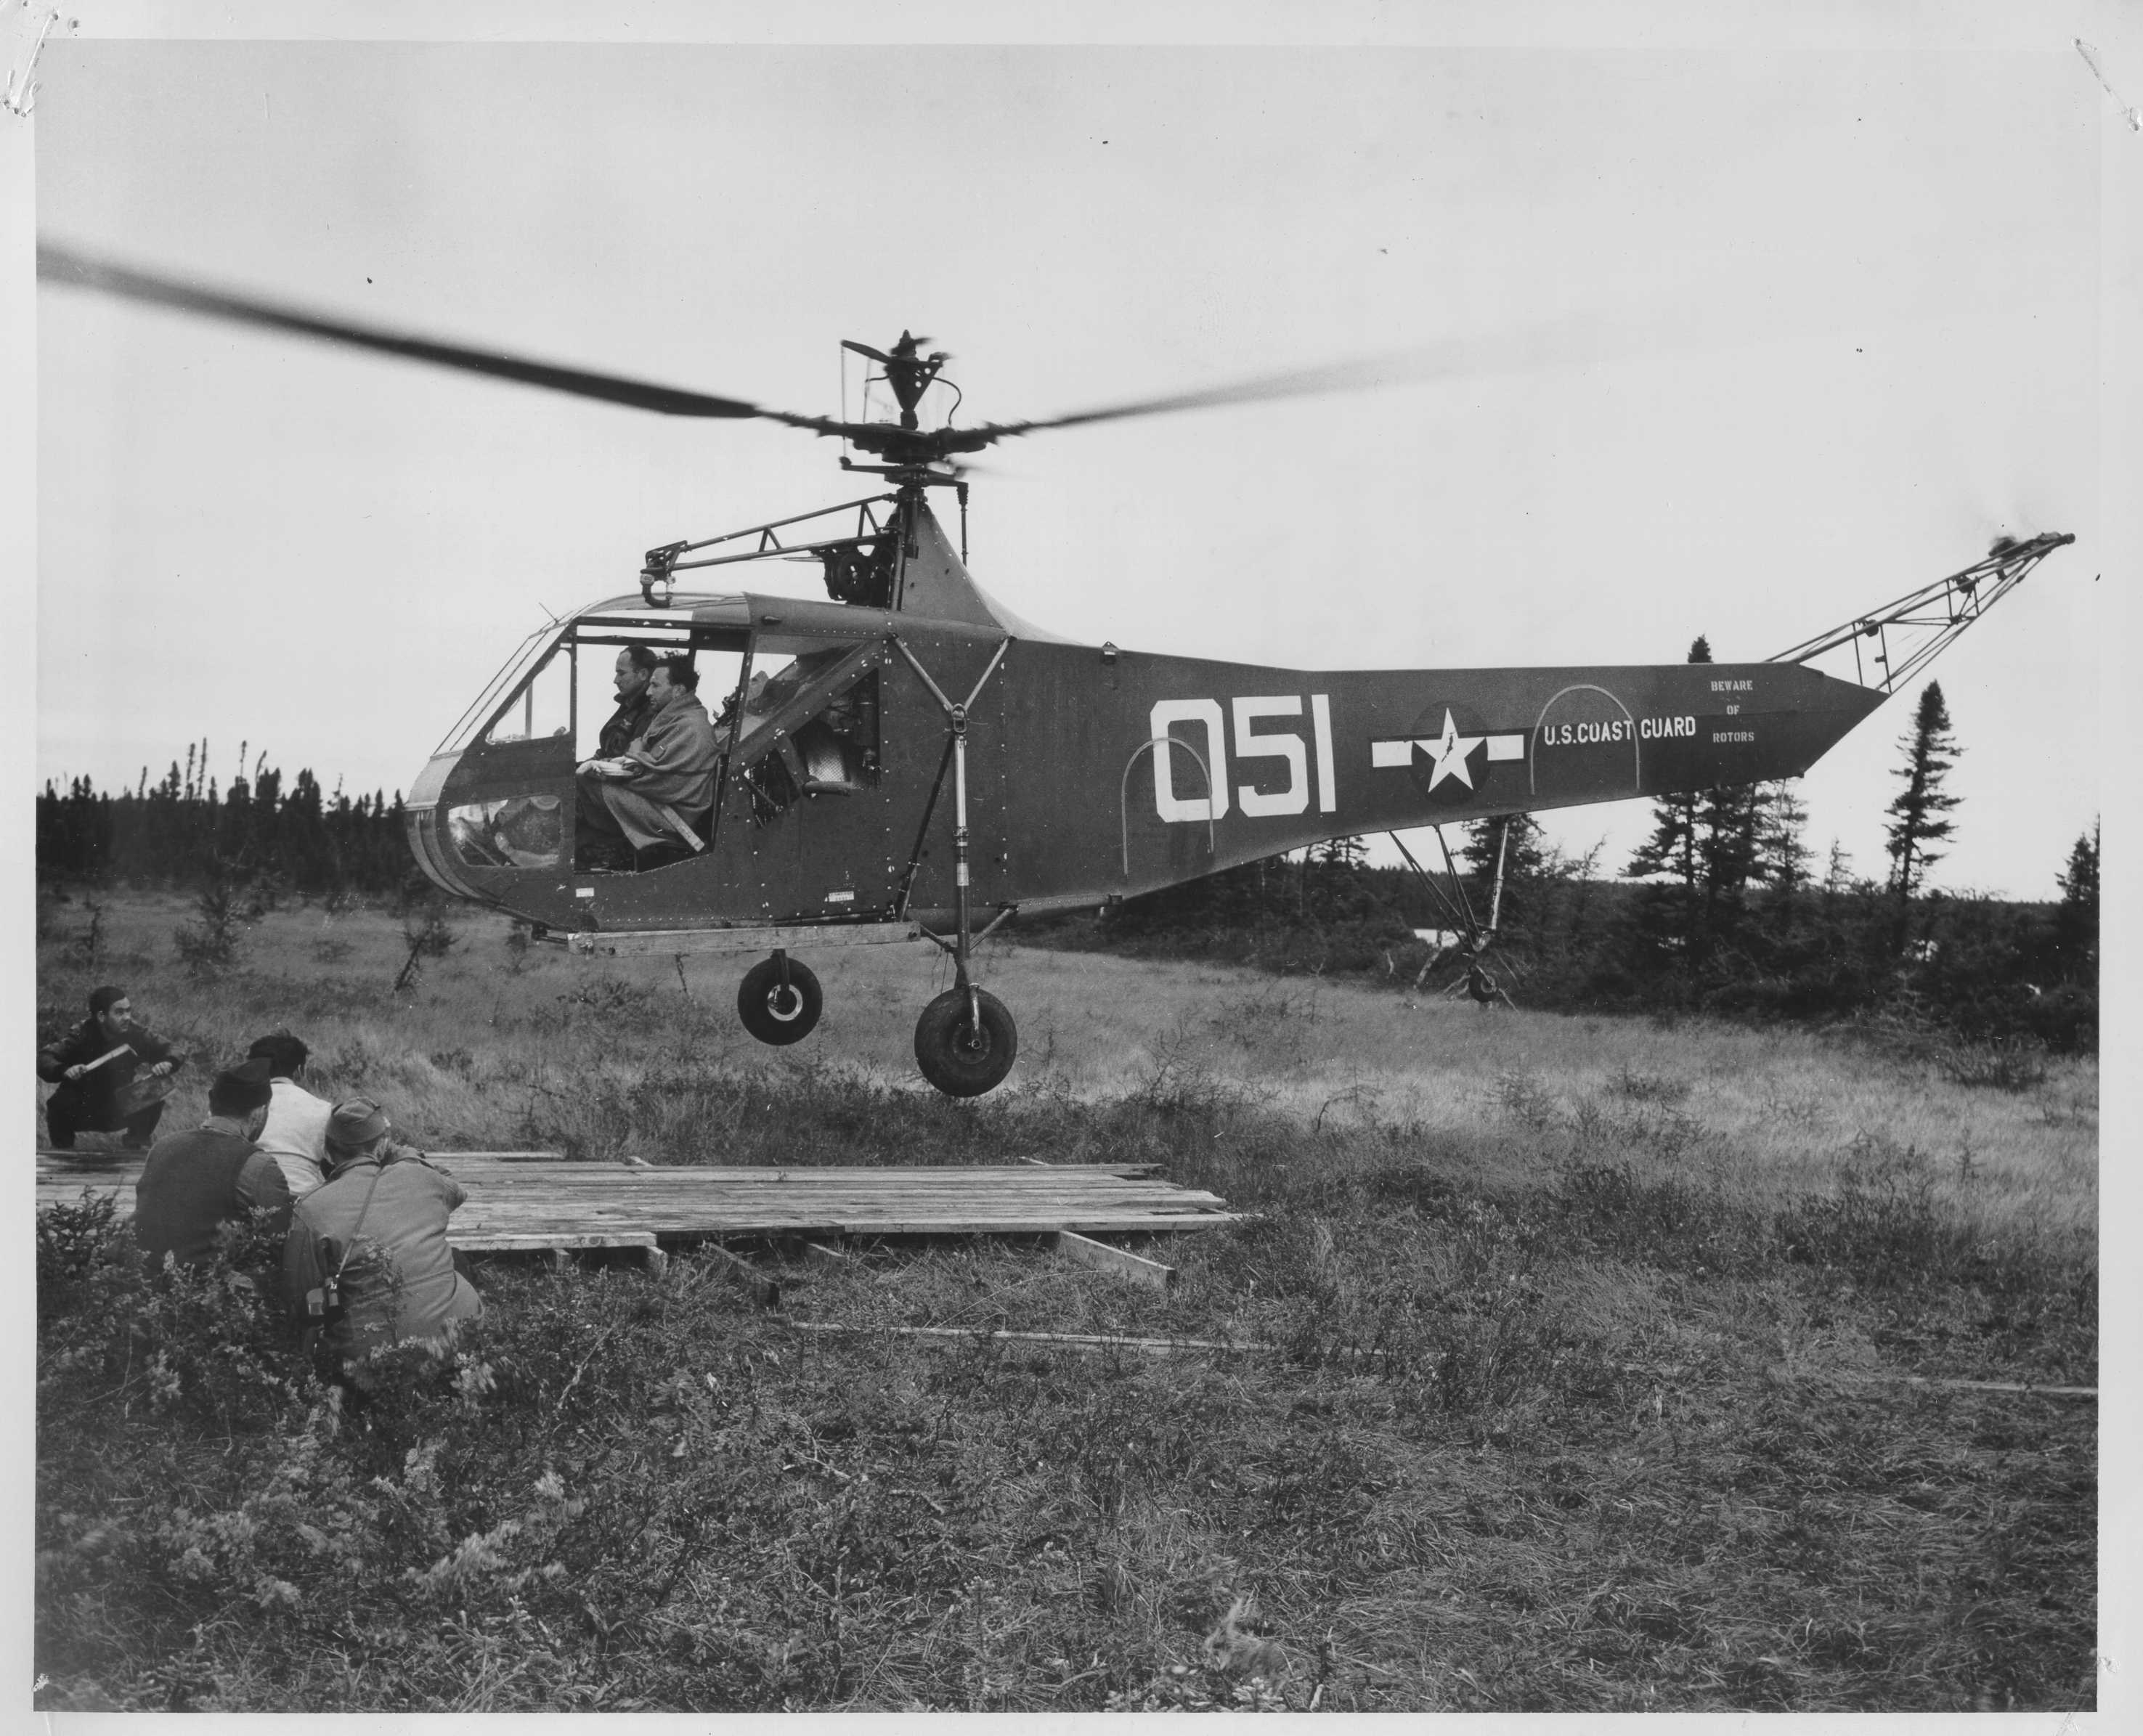 A Coast Guard Sikorsky HNS-1 “Hoverfly” landing on a makeshift landing pad placed on the soft muskeg near the crash site. (U.S. Coast Guard)